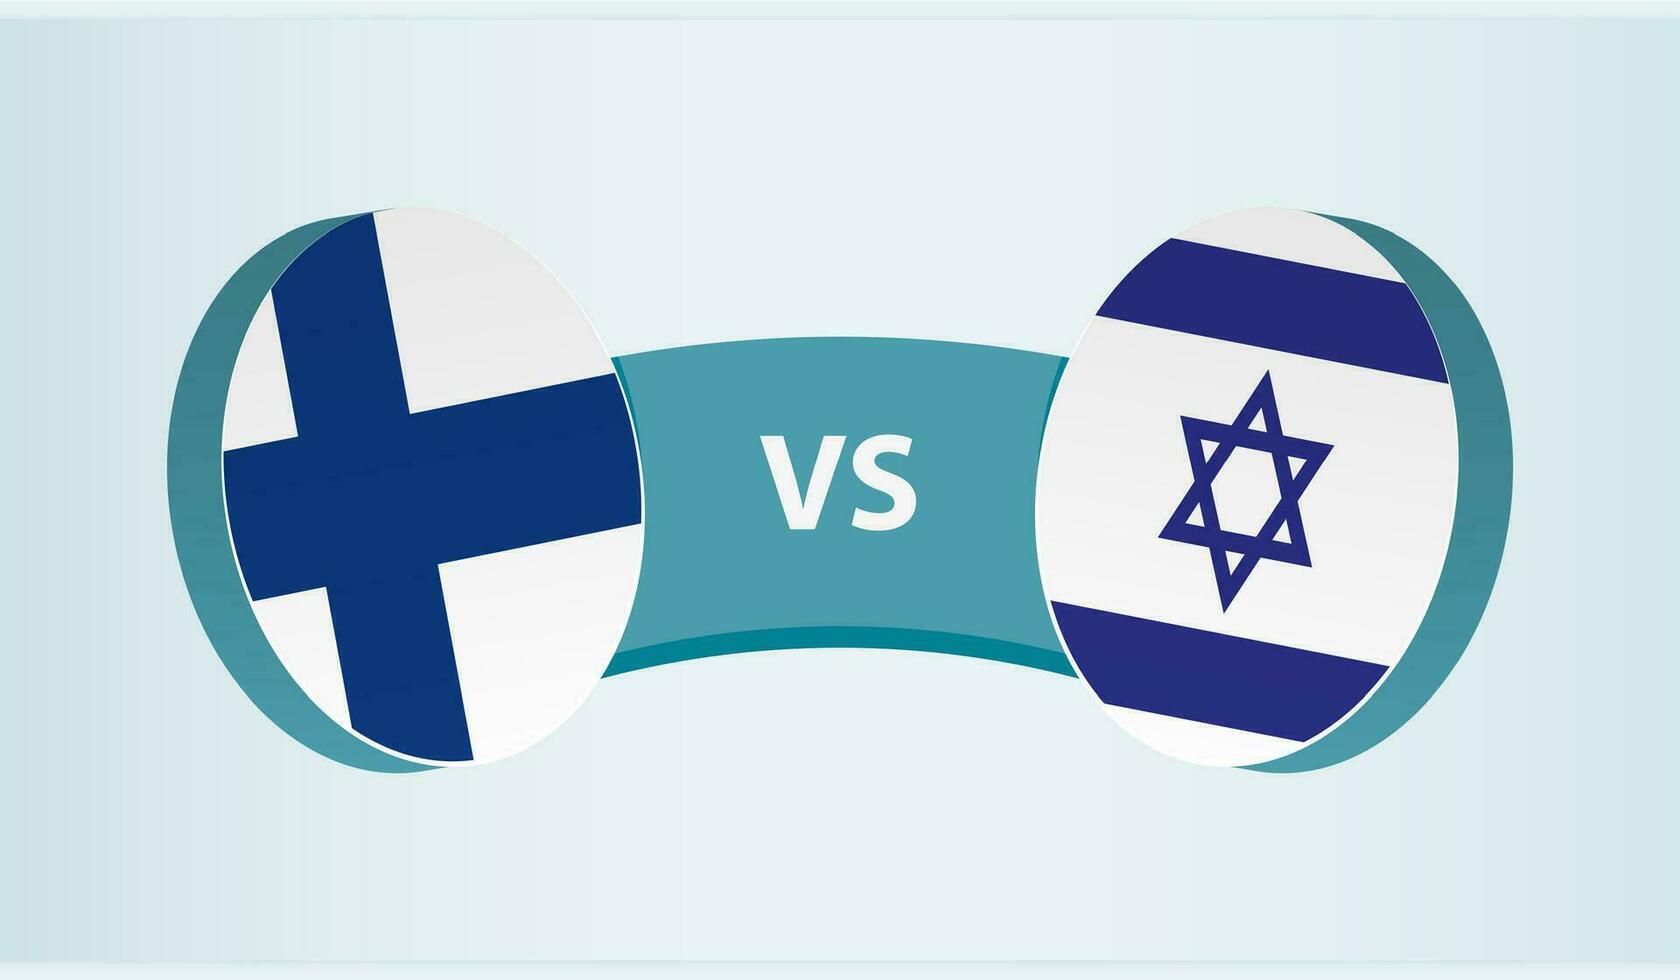 Finland versus Israel, team sports competition concept. vector